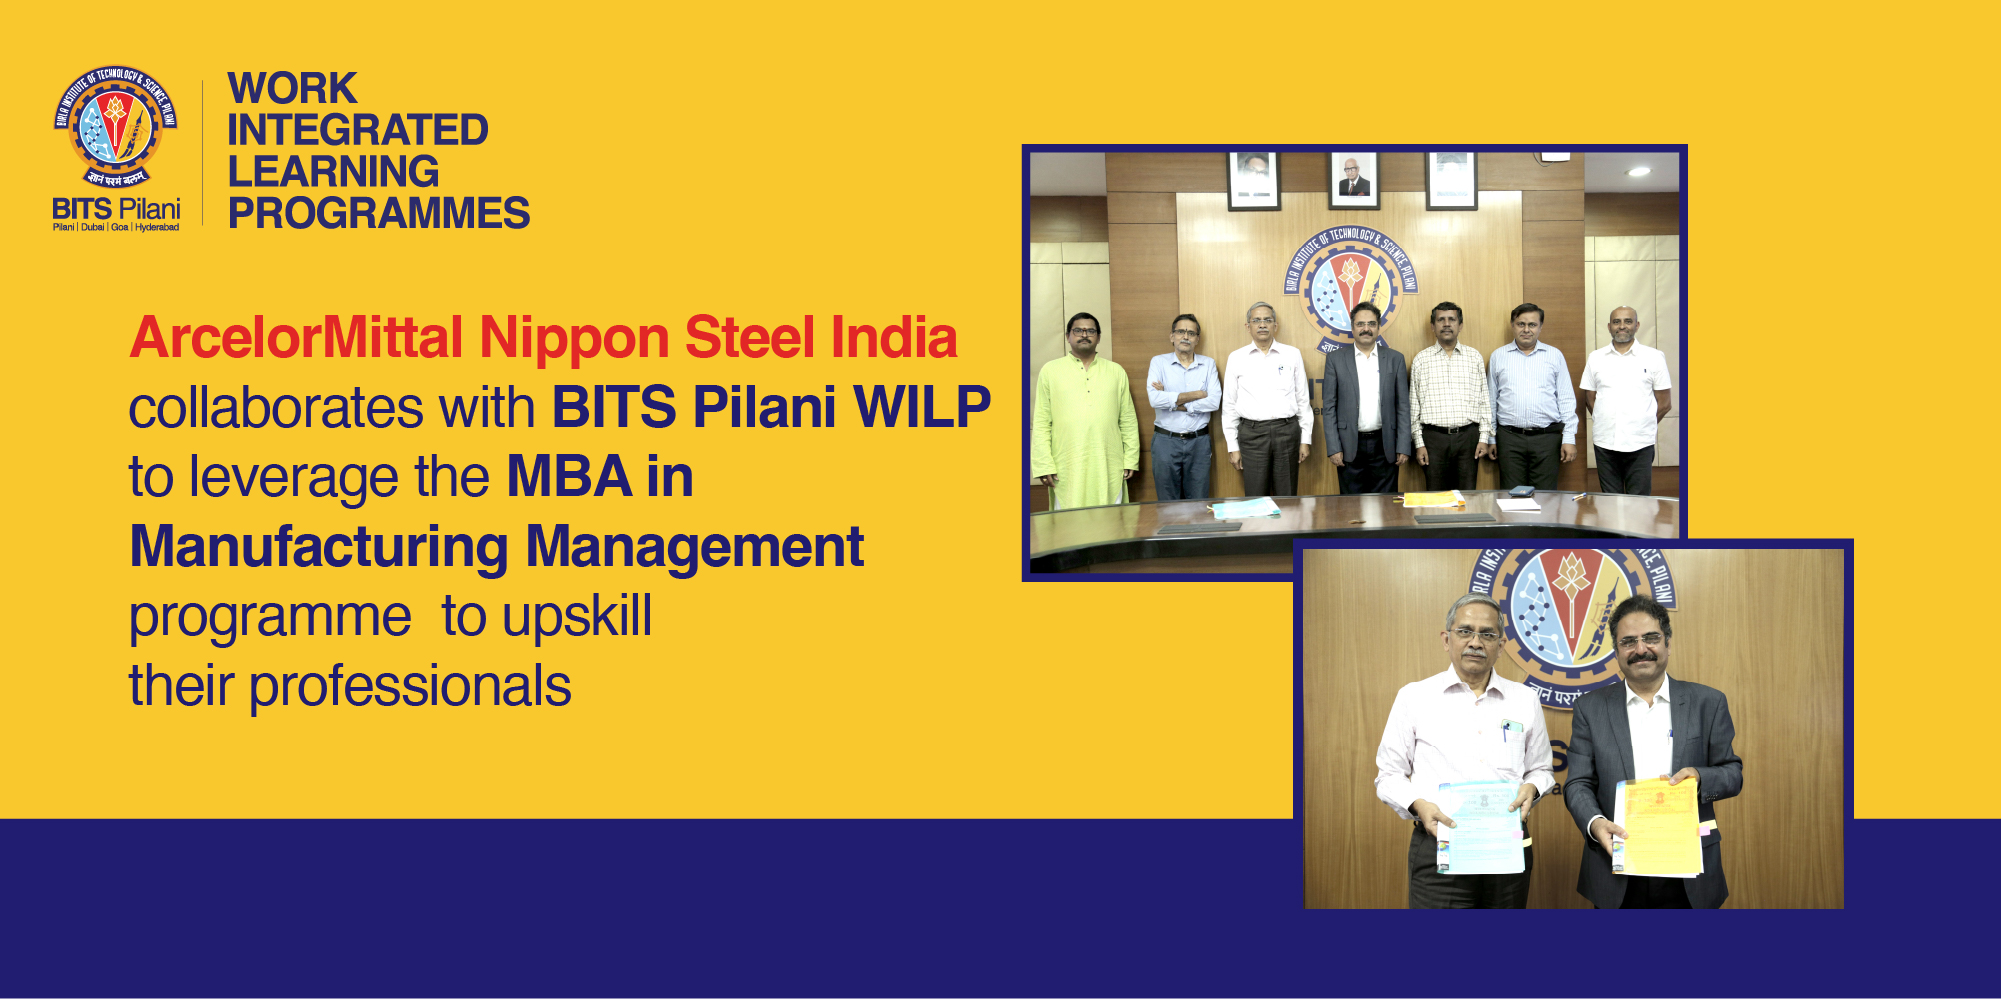 ArcelorMittal Nippon Steel India Collaborates with BITS Pilani WILP for MBA in Manufacturing Management Programme for its Professionals